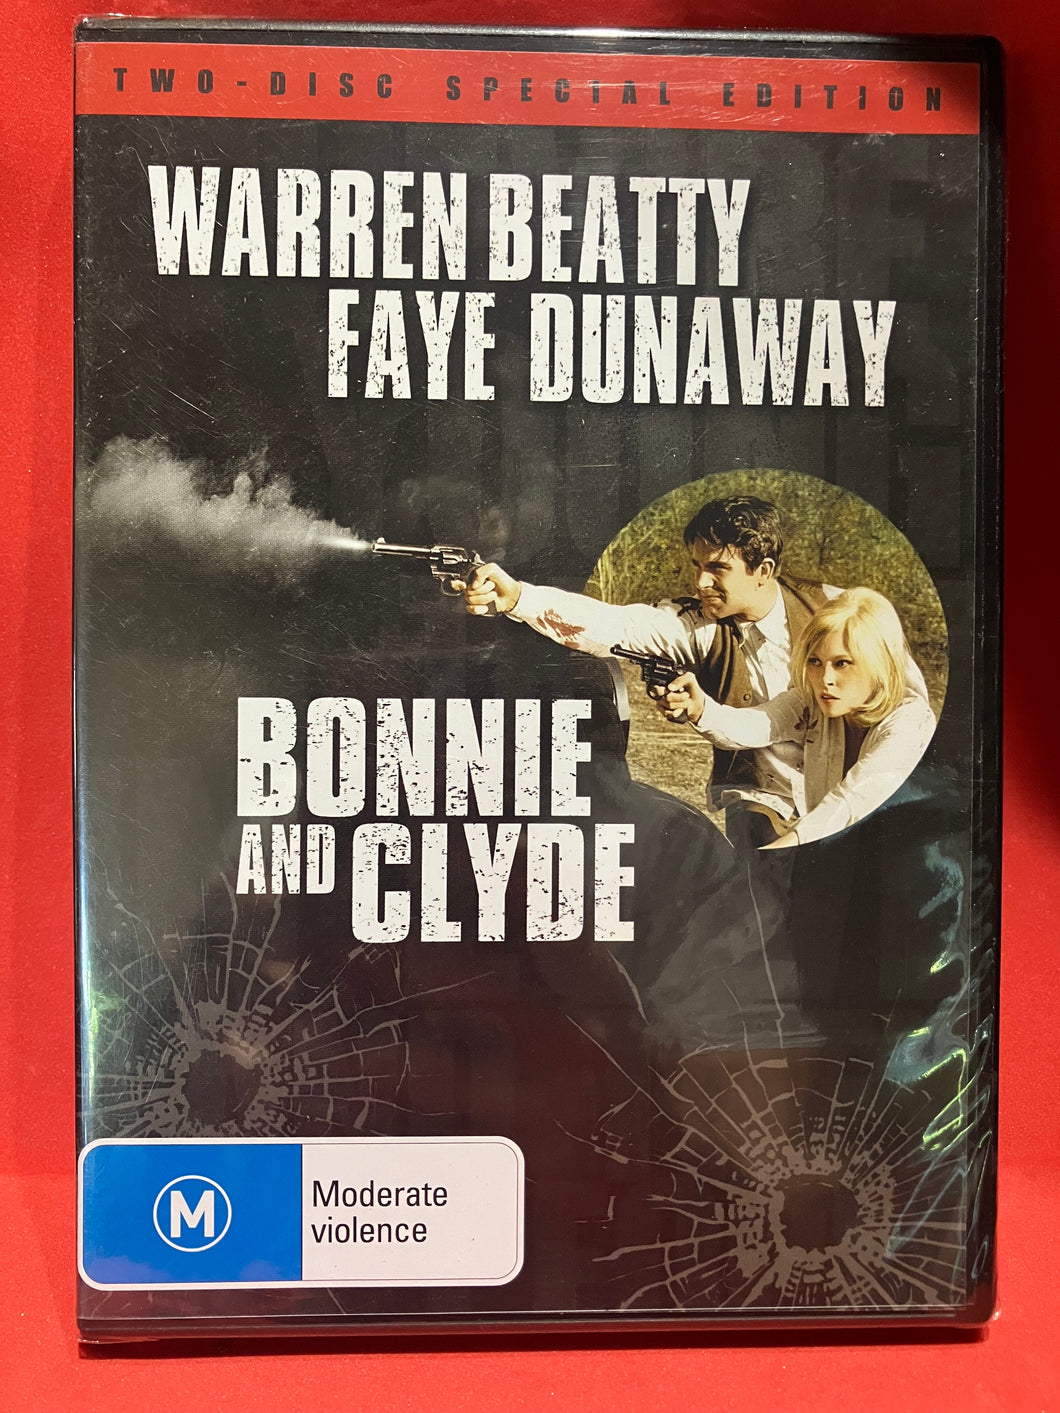 BONNIE AND CLYDE - 2 DISC SPECIAL EDITION - DVD (SEALED)